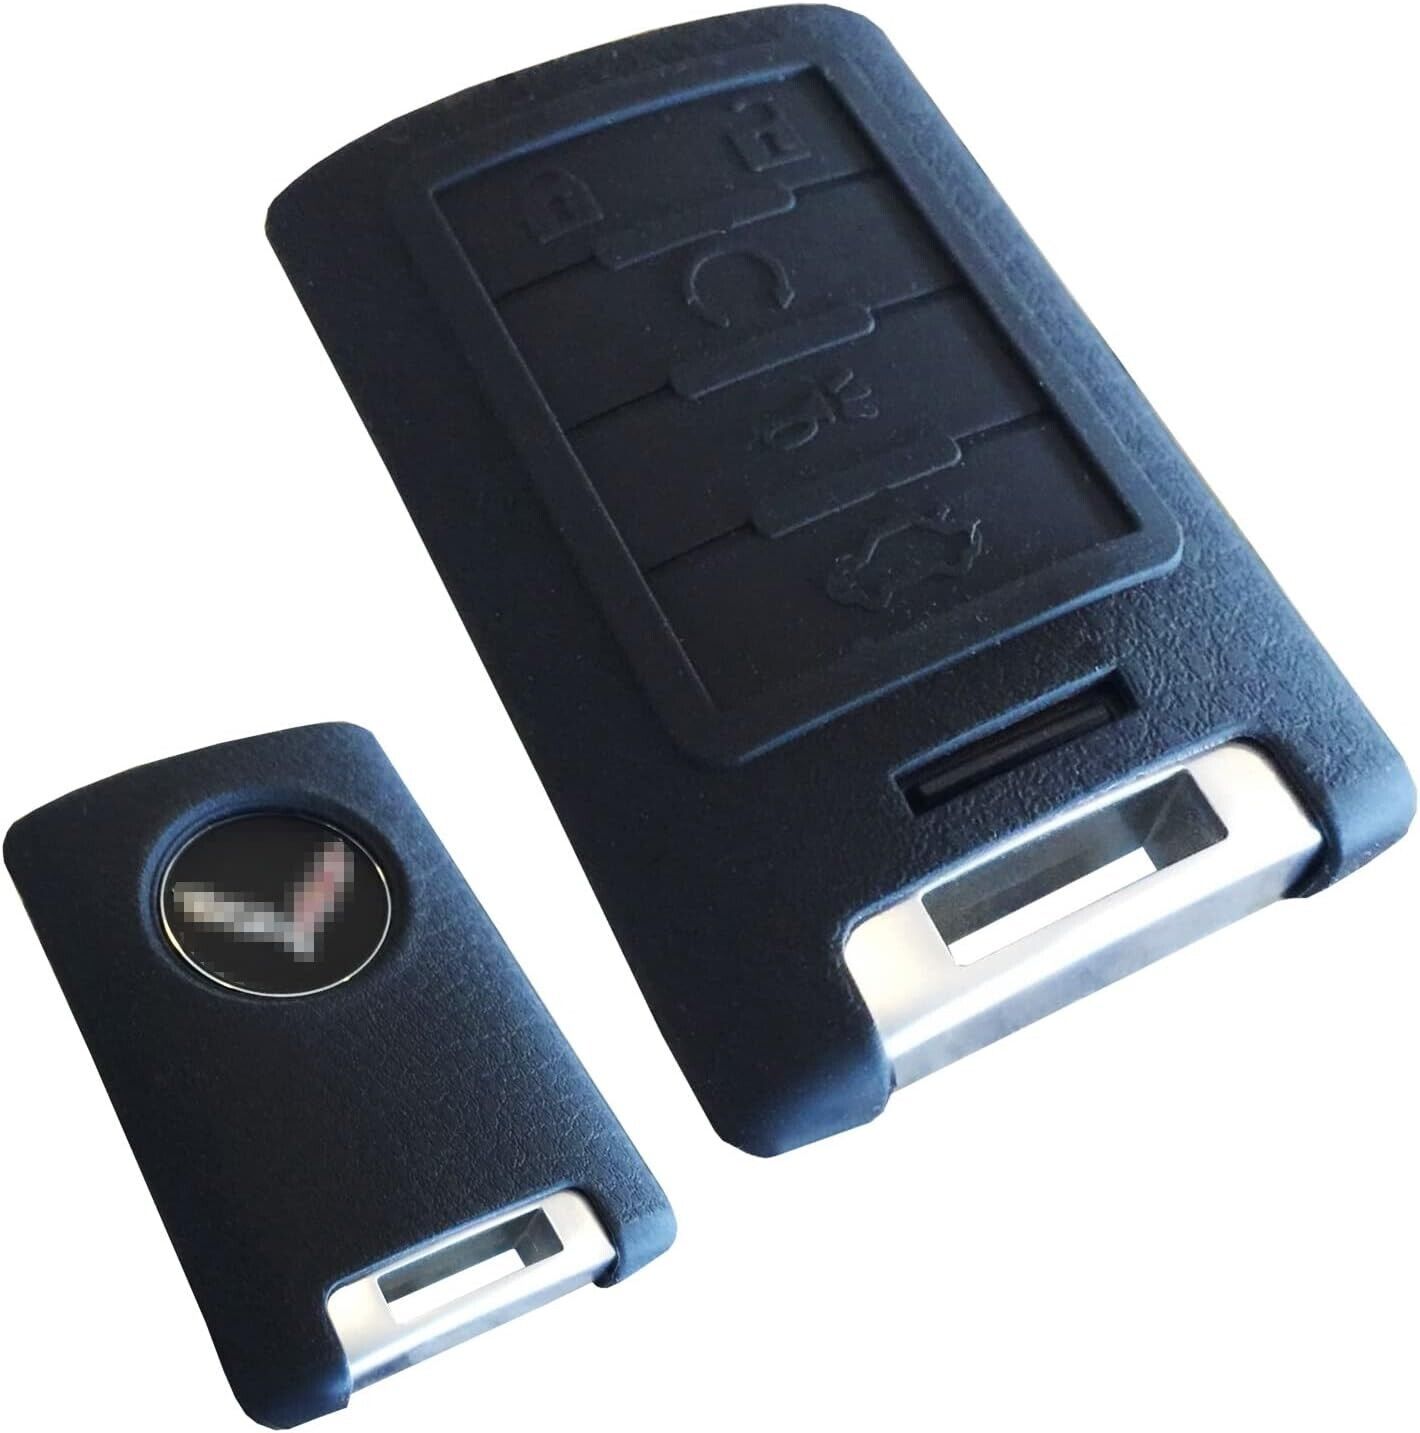 Remote Smart Key Soft Silicone Fob Case Holder Cover For Cadillac CTS Escalade